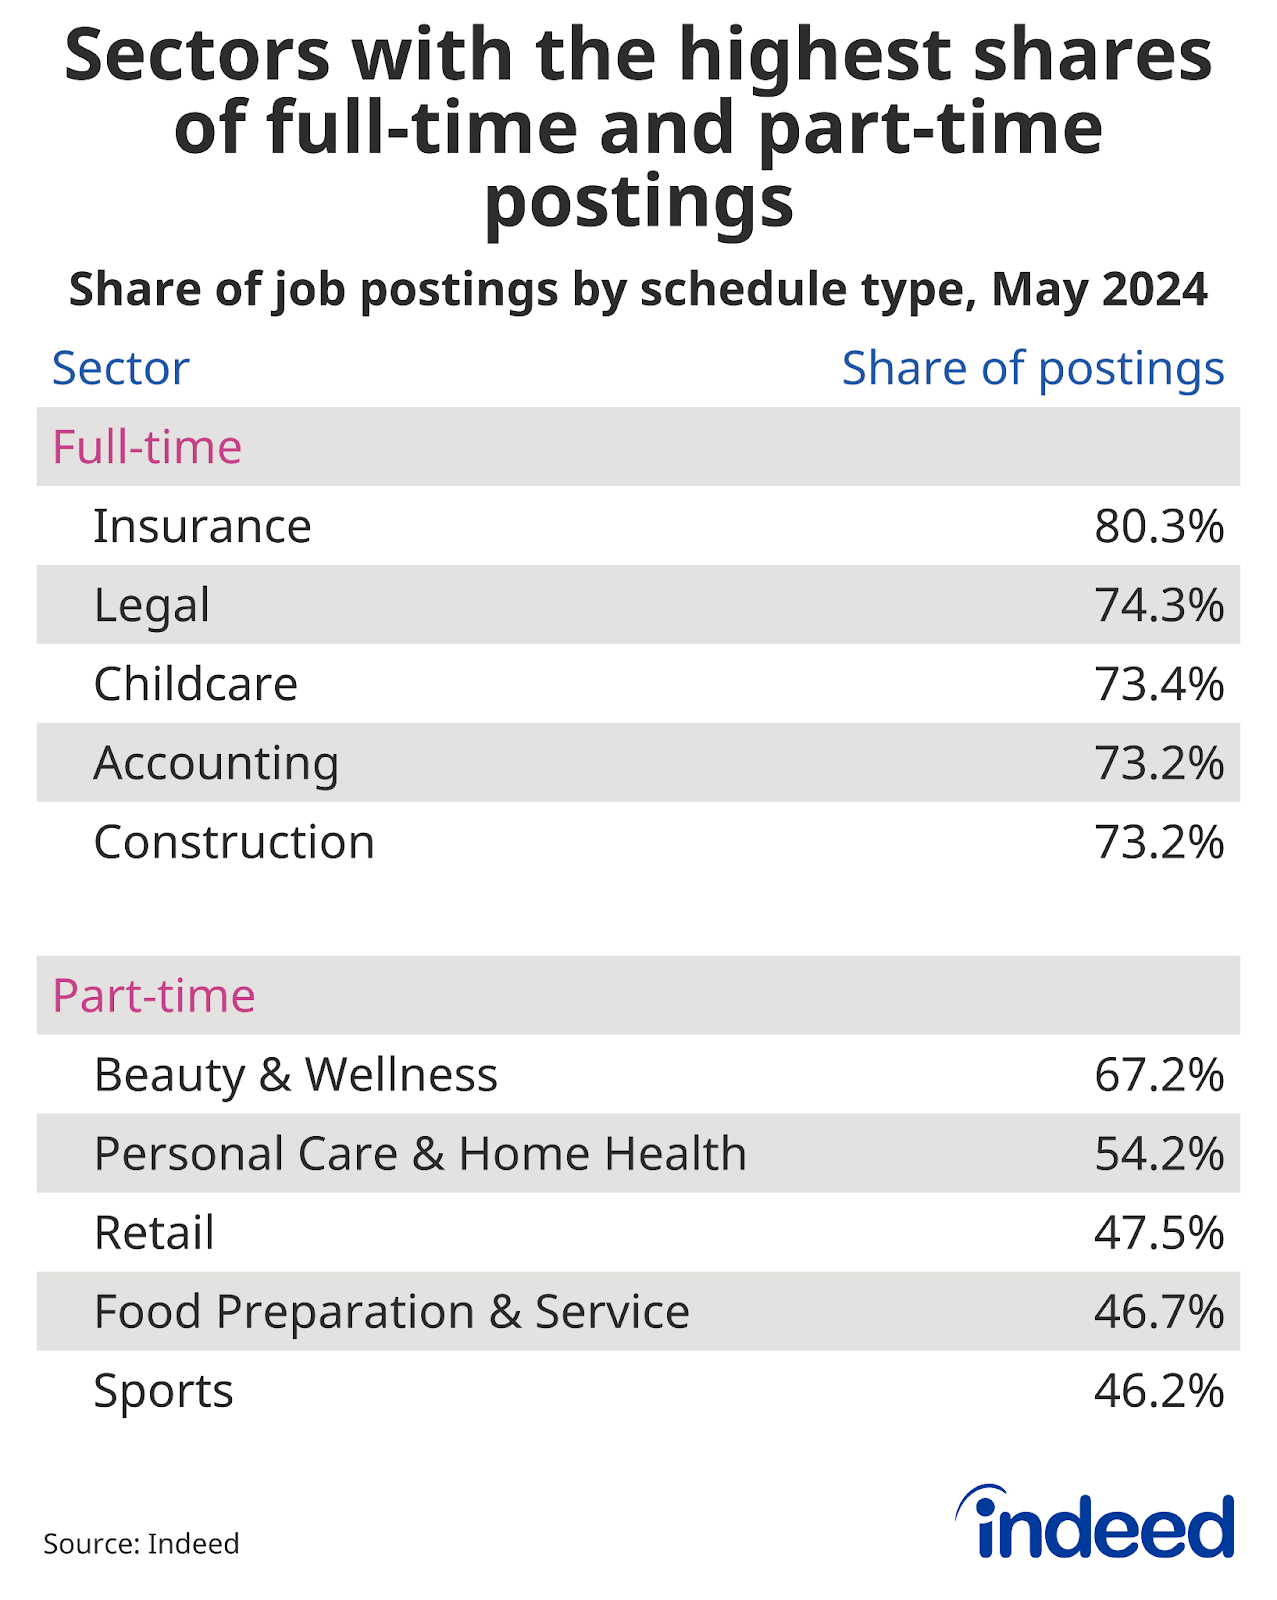 Table showing sectors with the highest share of full-time and part-time job postings as of May 2024. Insurance has the highest share of full-time job postings, while Beauty & Wellness tops the part-time category. 